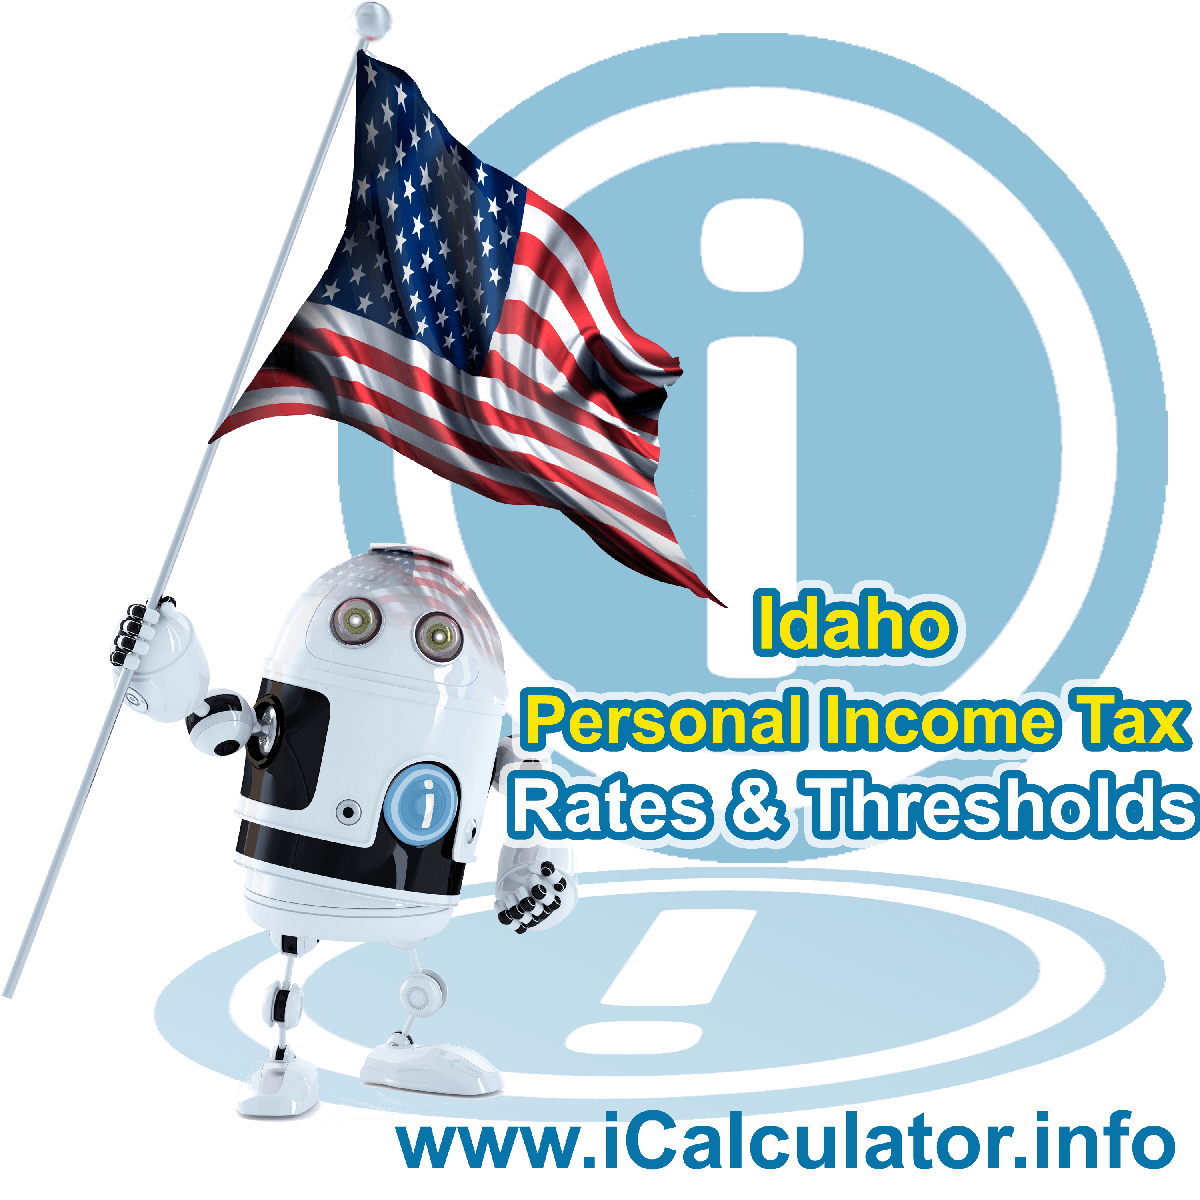 Idaho State Tax Tables 2013. This image displays details of the Idaho State Tax Tables for the 2013 tax return year which is provided in support of the 2013 US Tax Calculator